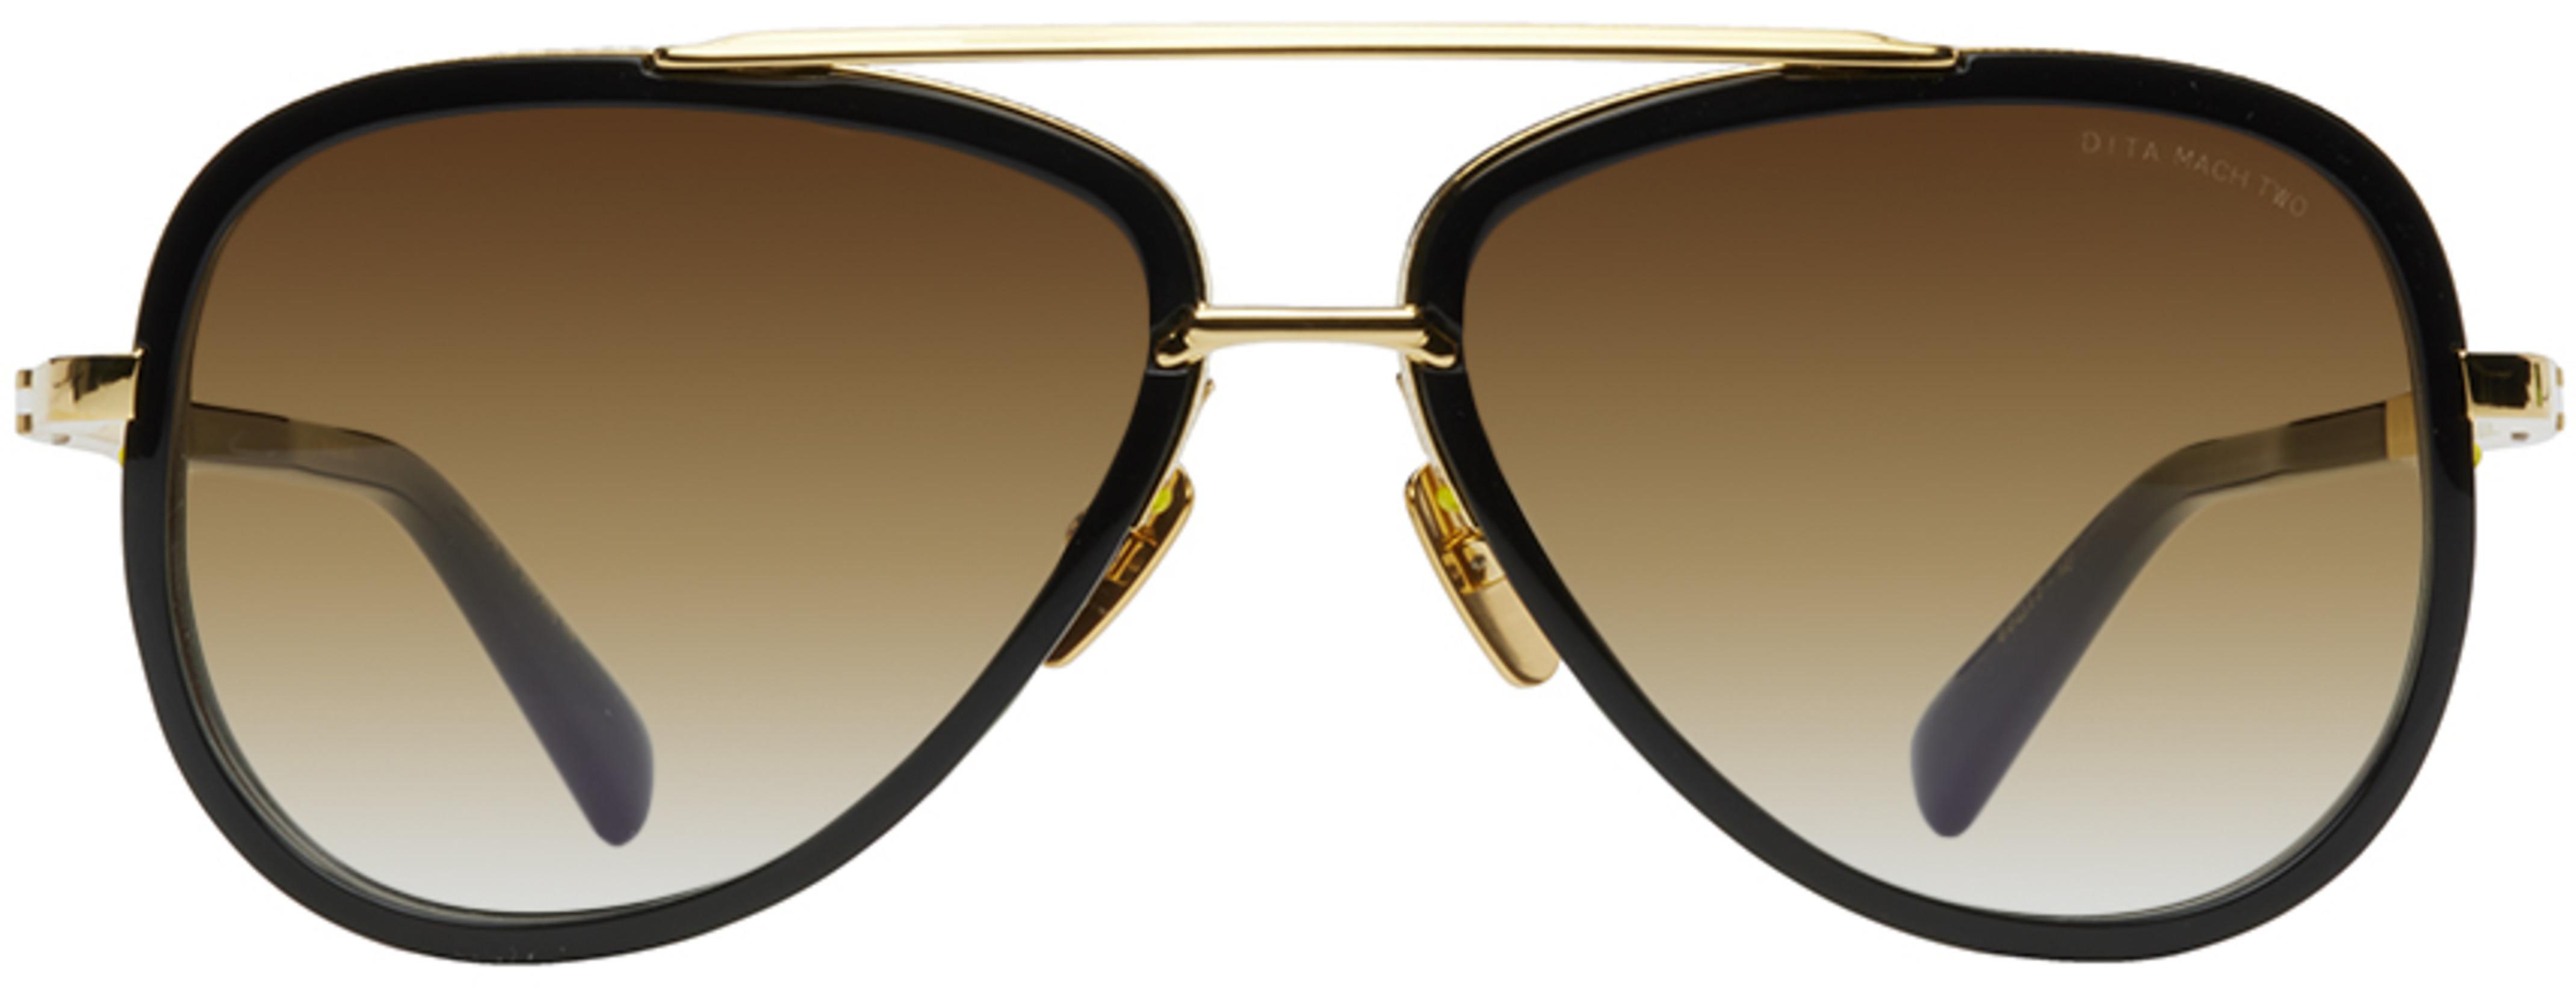 Black & Gold Mach Two Sunglasses by DITA